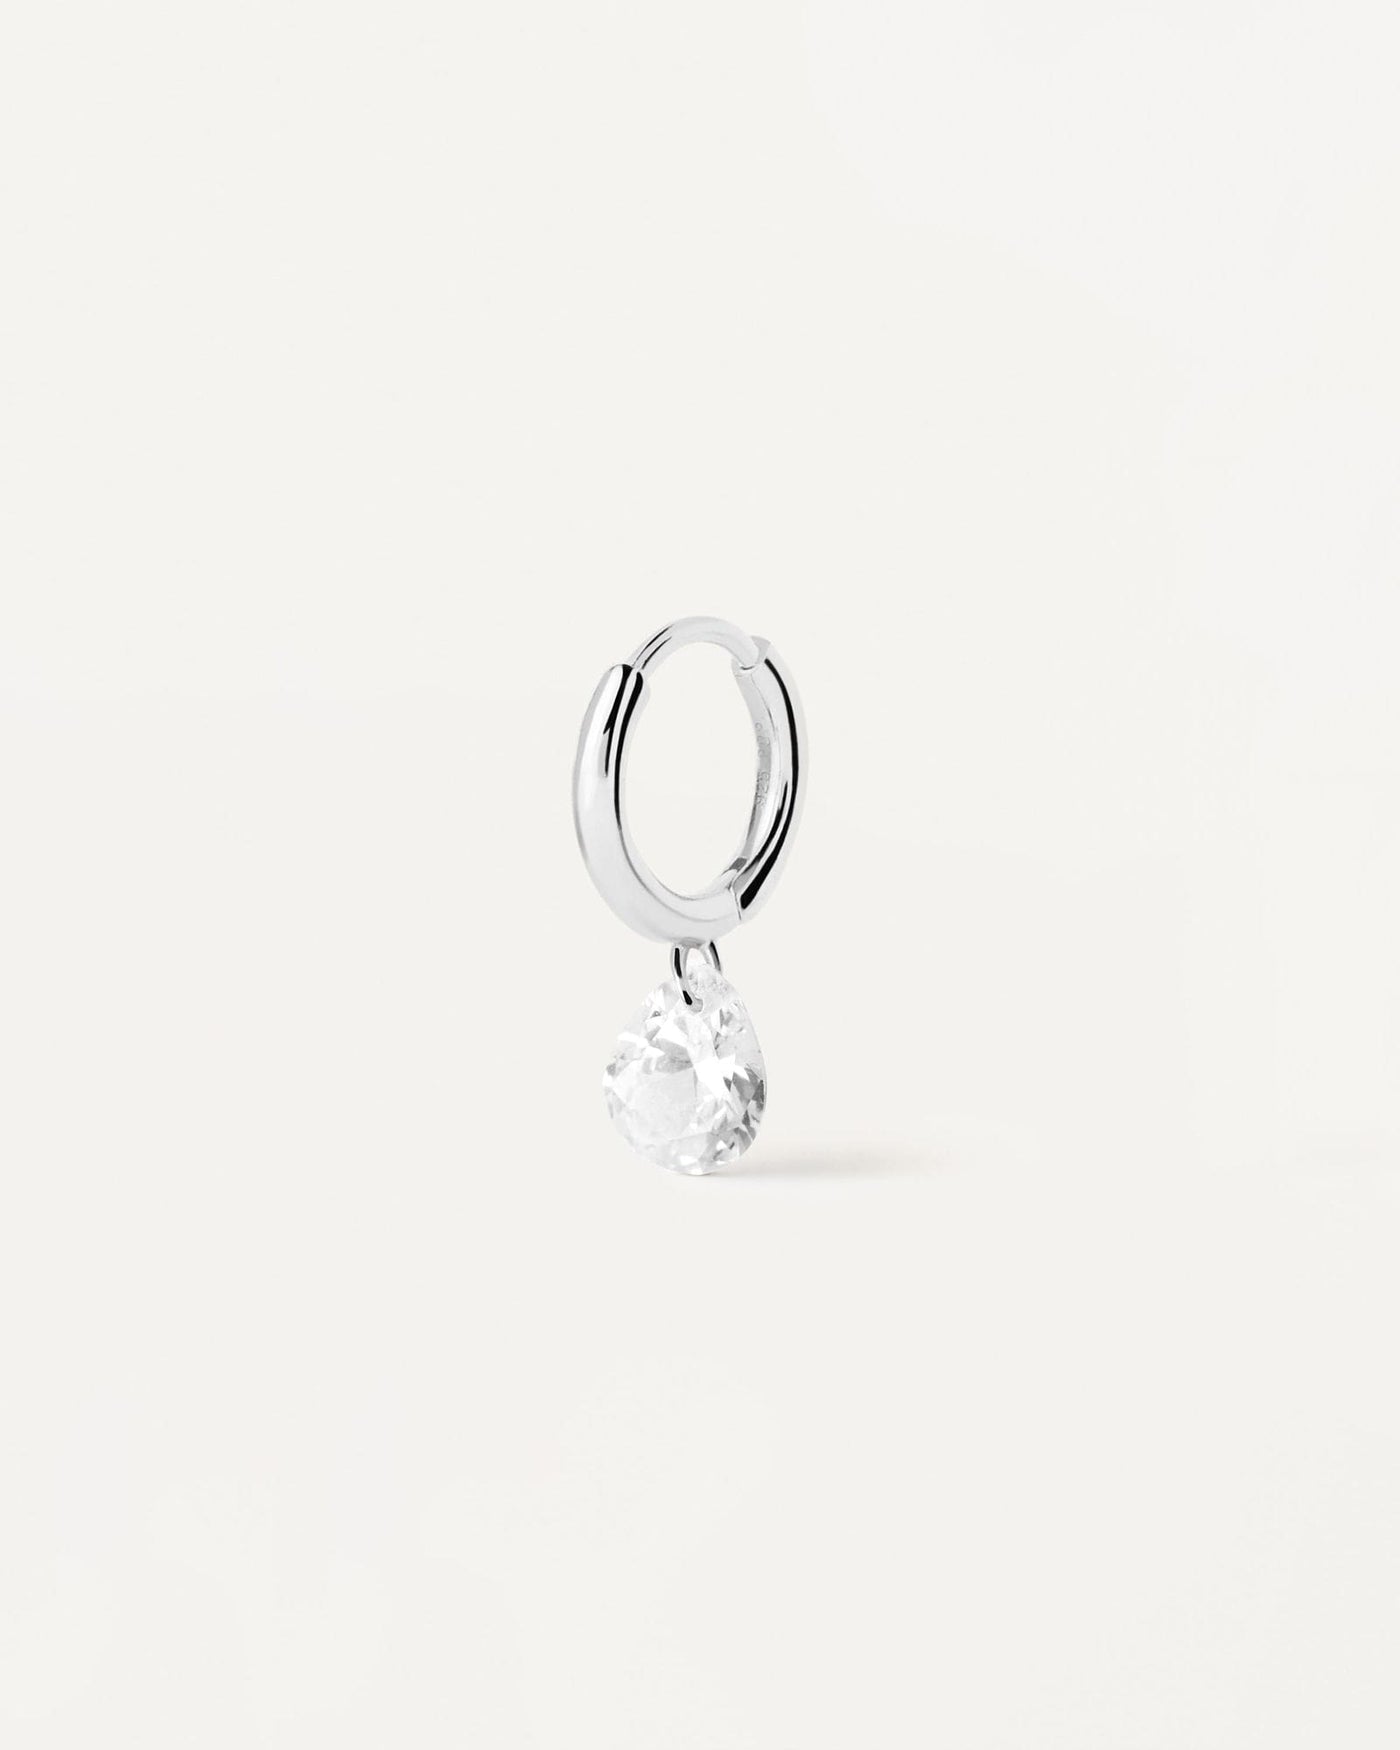 2024 Selection | Aqua silver single hoop Earring. Sterling silver ear piercing with white zirconia drop pendant. Get the latest arrival from PDPAOLA. Place your order safely and get this Best Seller. Free Shipping.